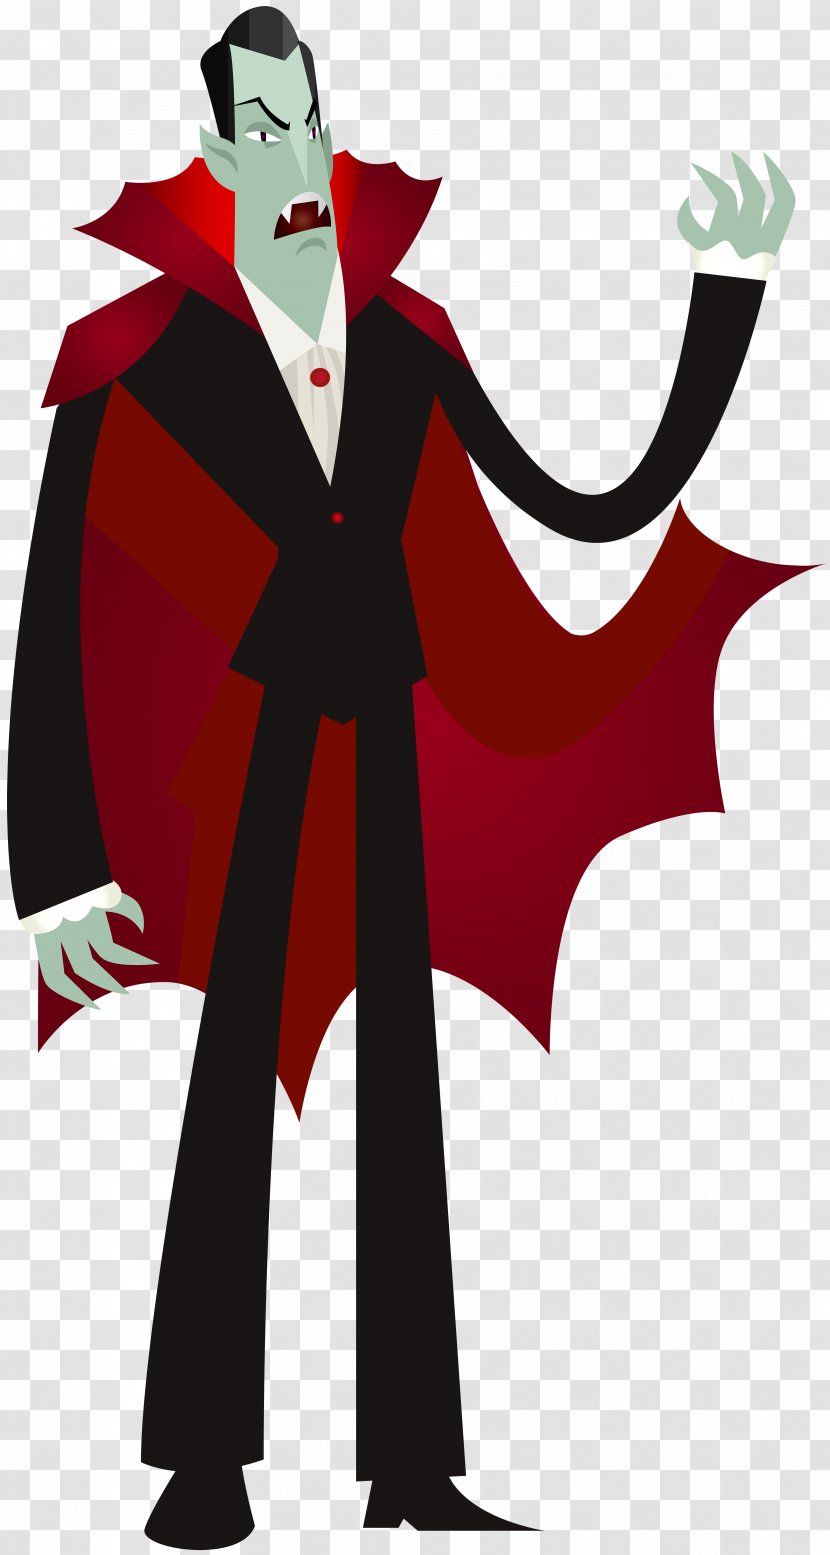 Vampire Halloween Clip Art - Mythical Creature Transparent PNG